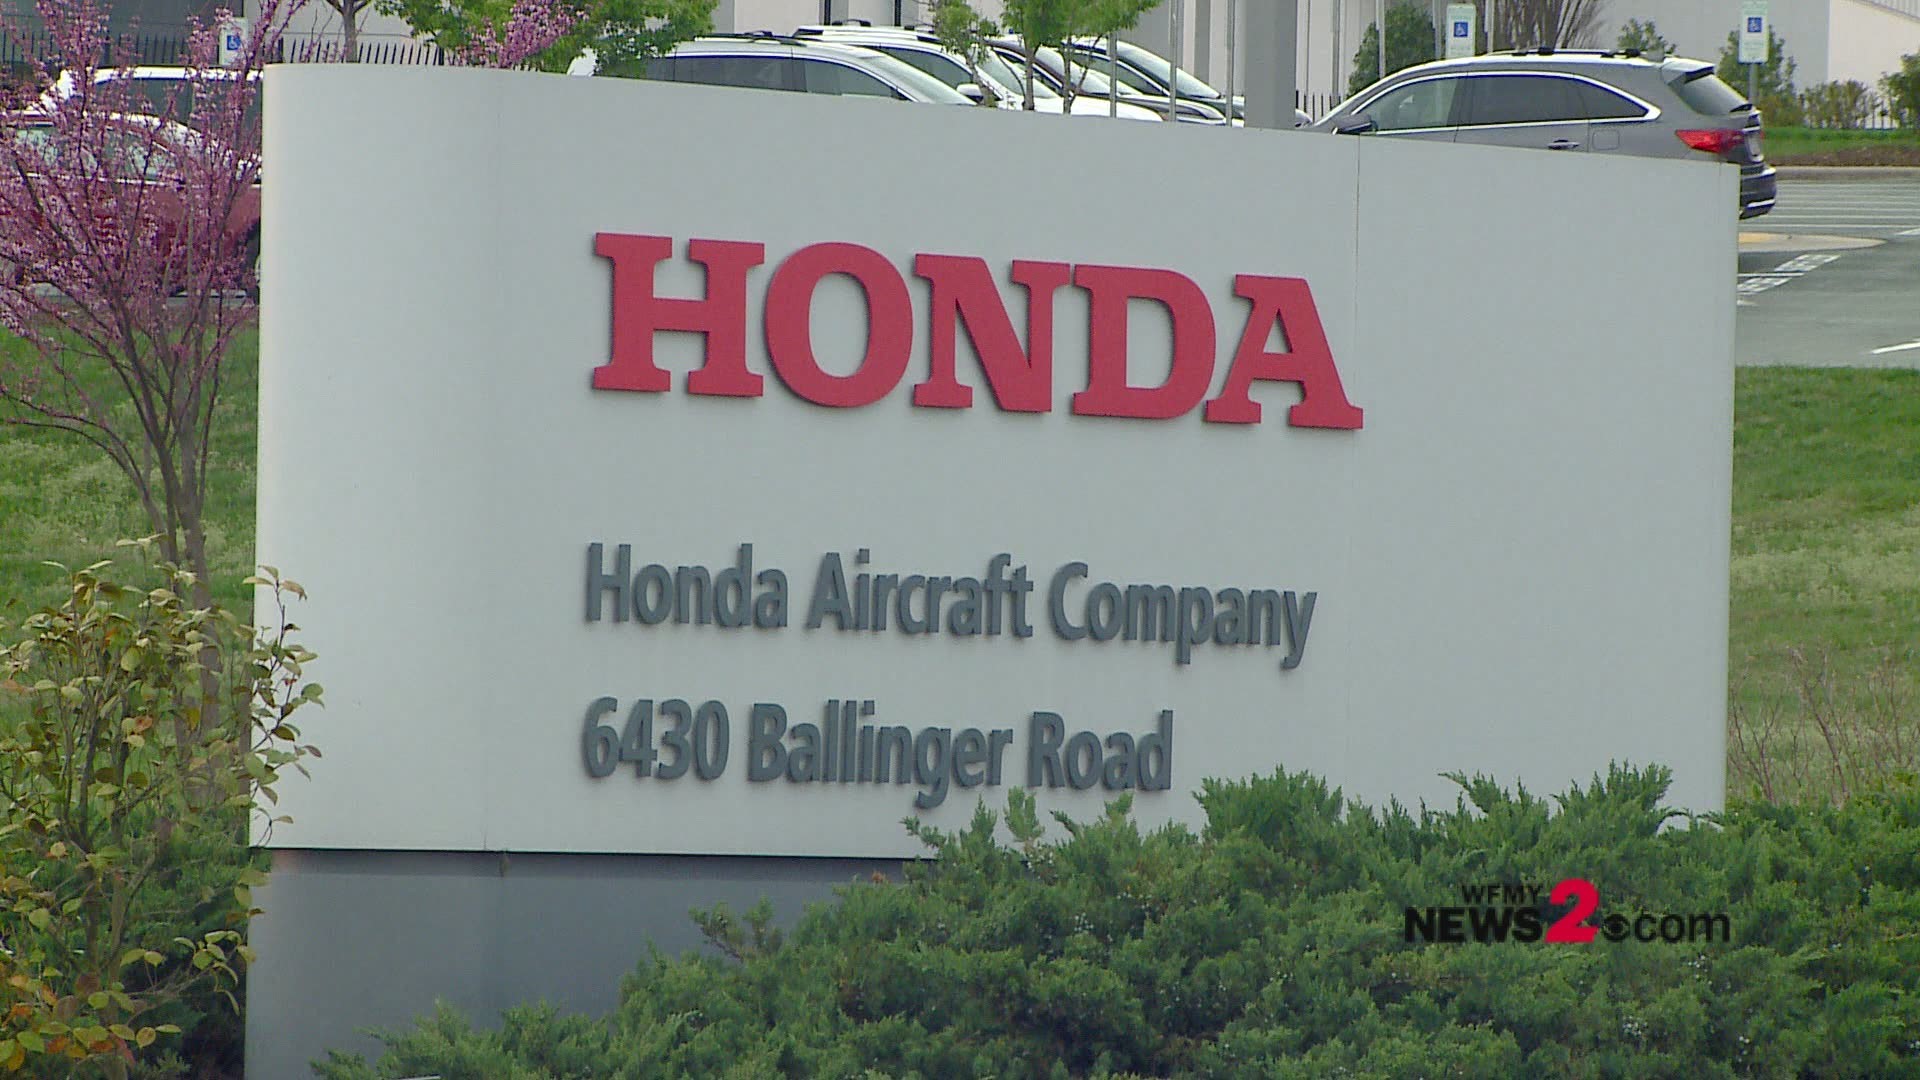 Honda Aircraft Company said it will suspend production for ten days beginning March 30, with plans to resume production on April 14.